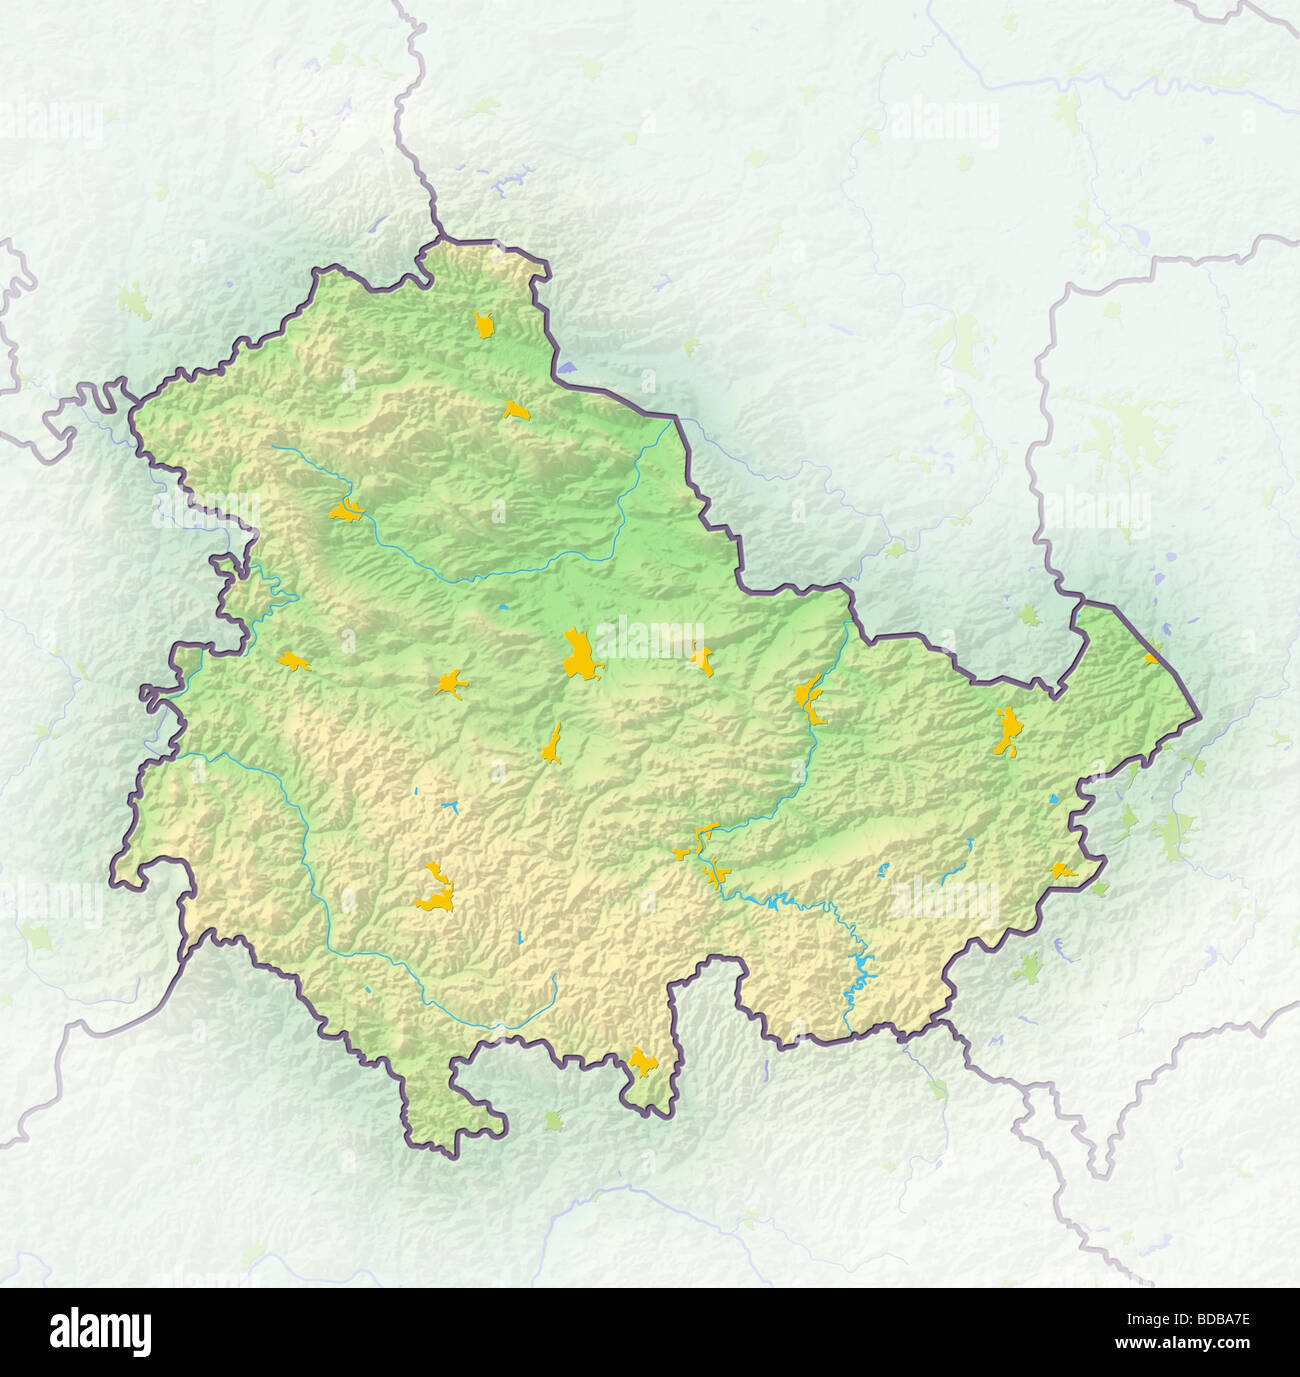 Thuringia (Thüringen), german federal state, shaded relief map. Stock Photo